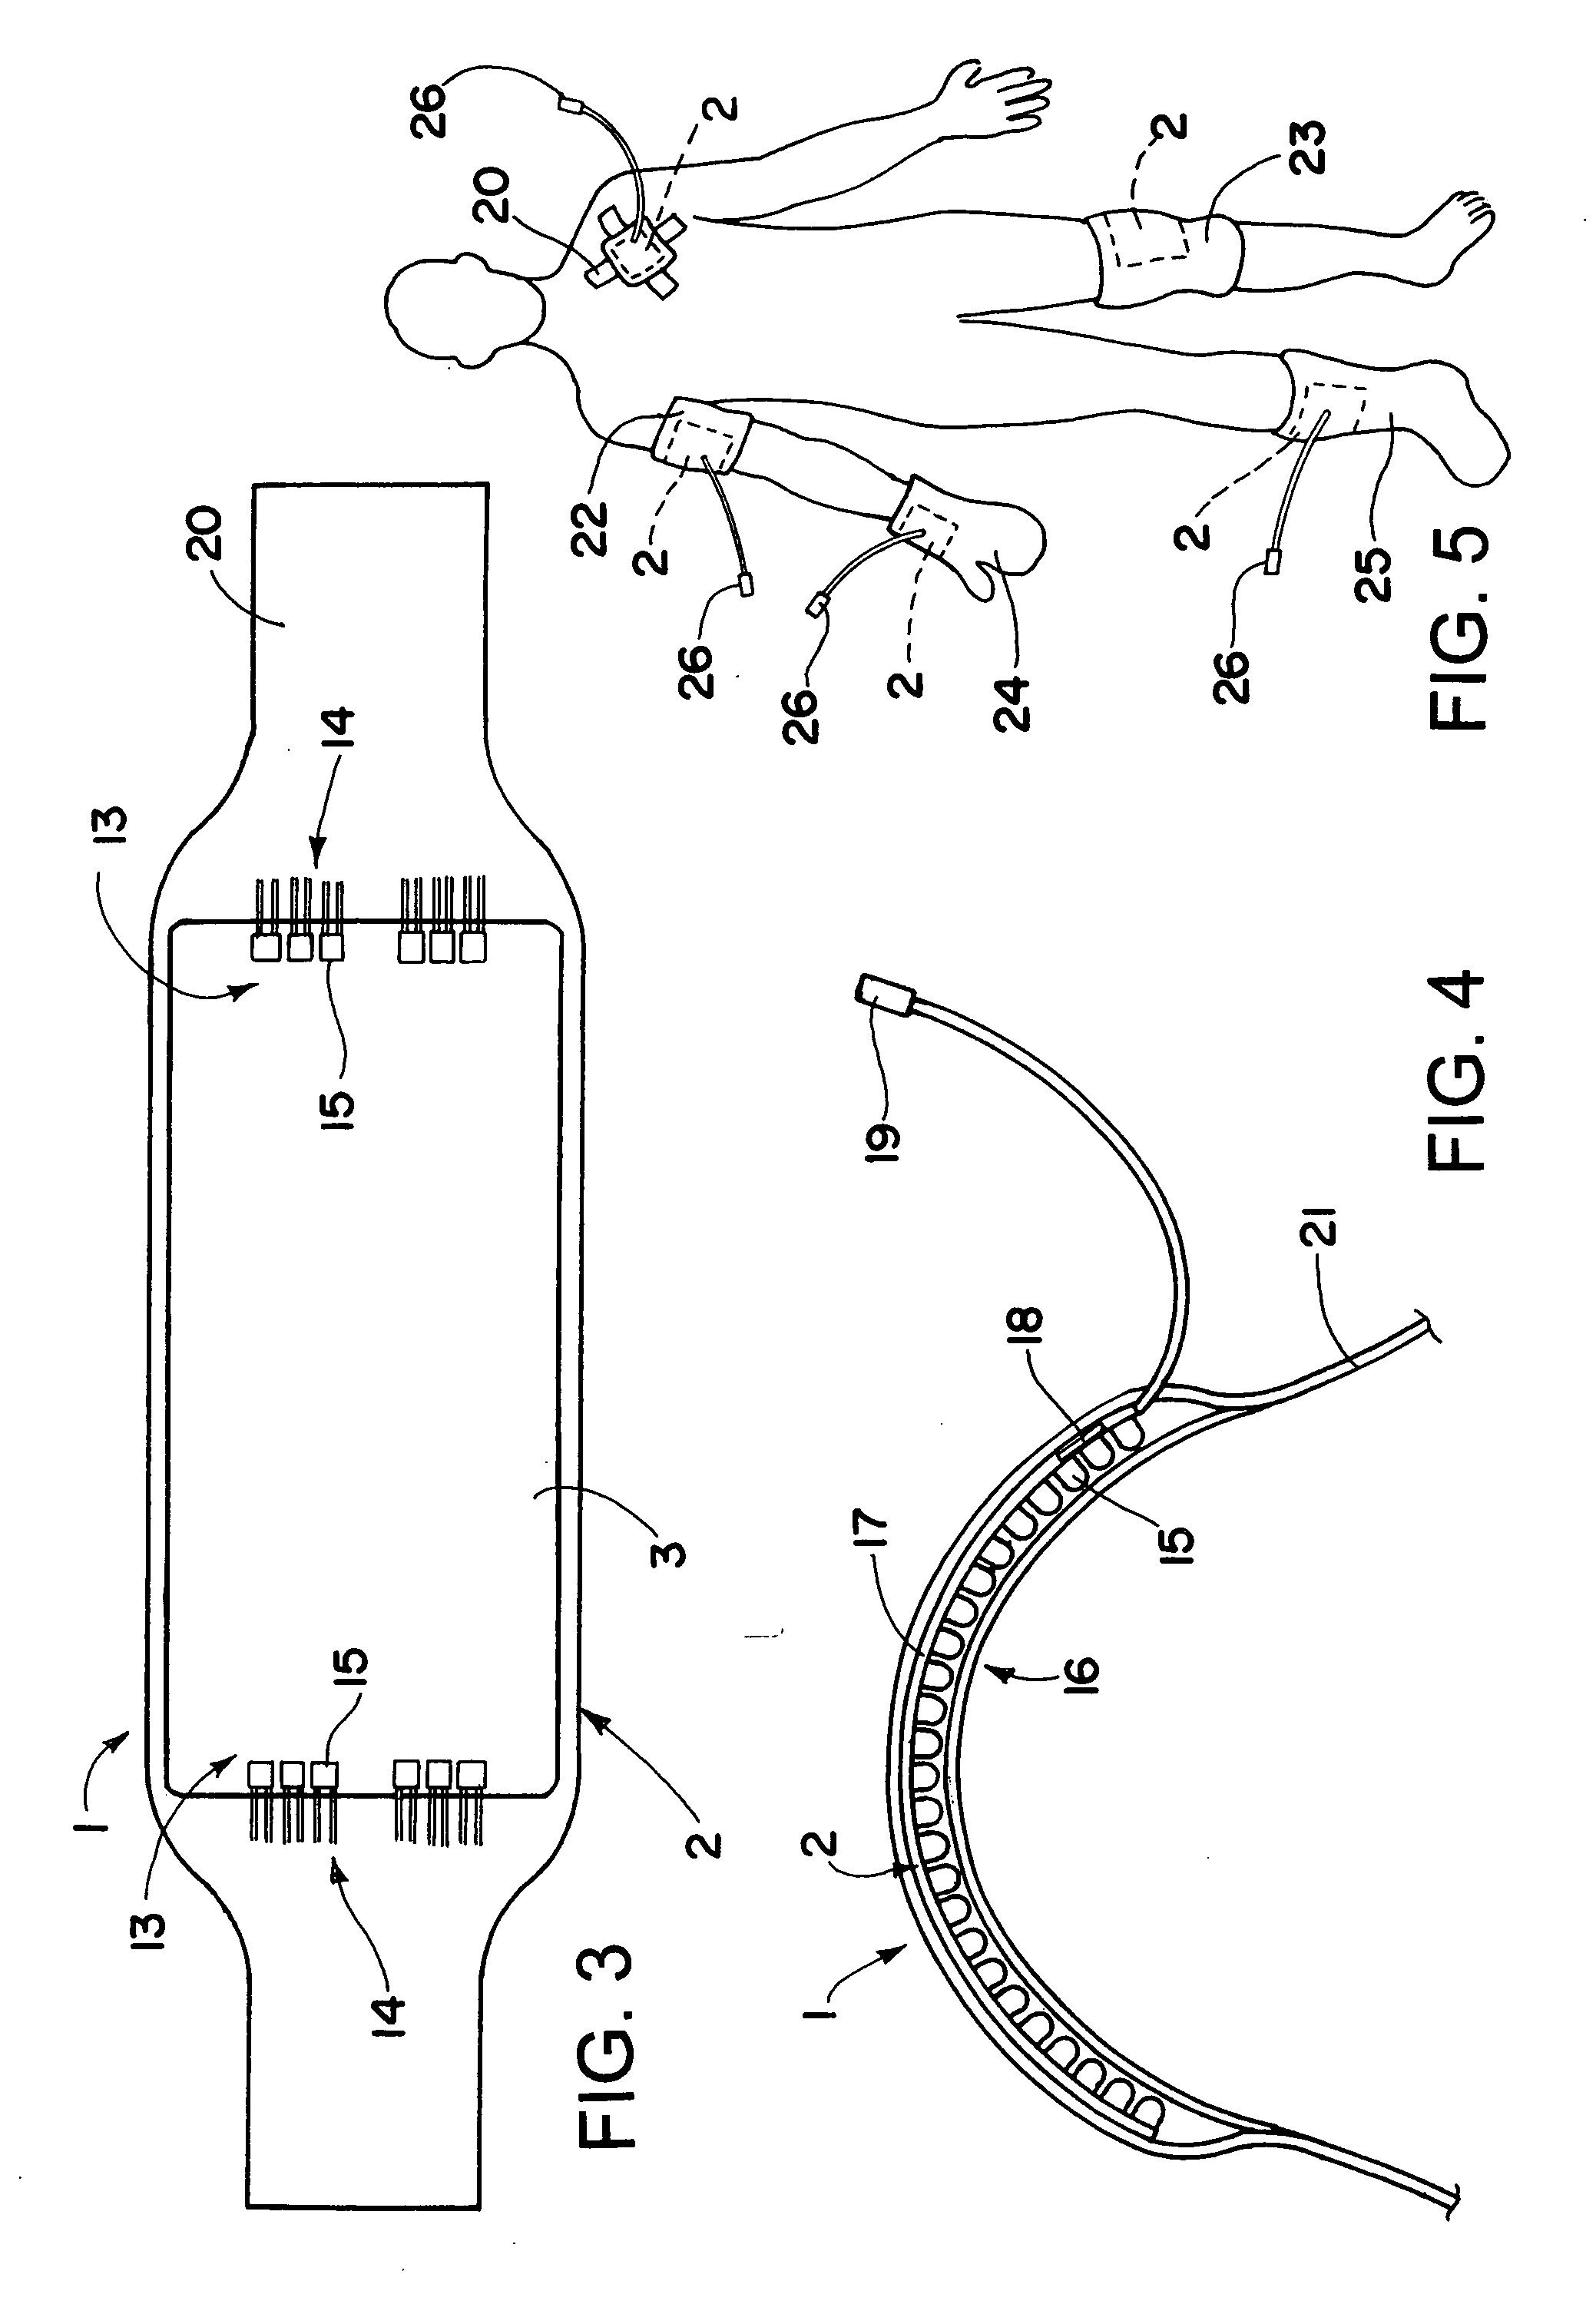 Phototherapy treatment devices for applying area lighting to a wound